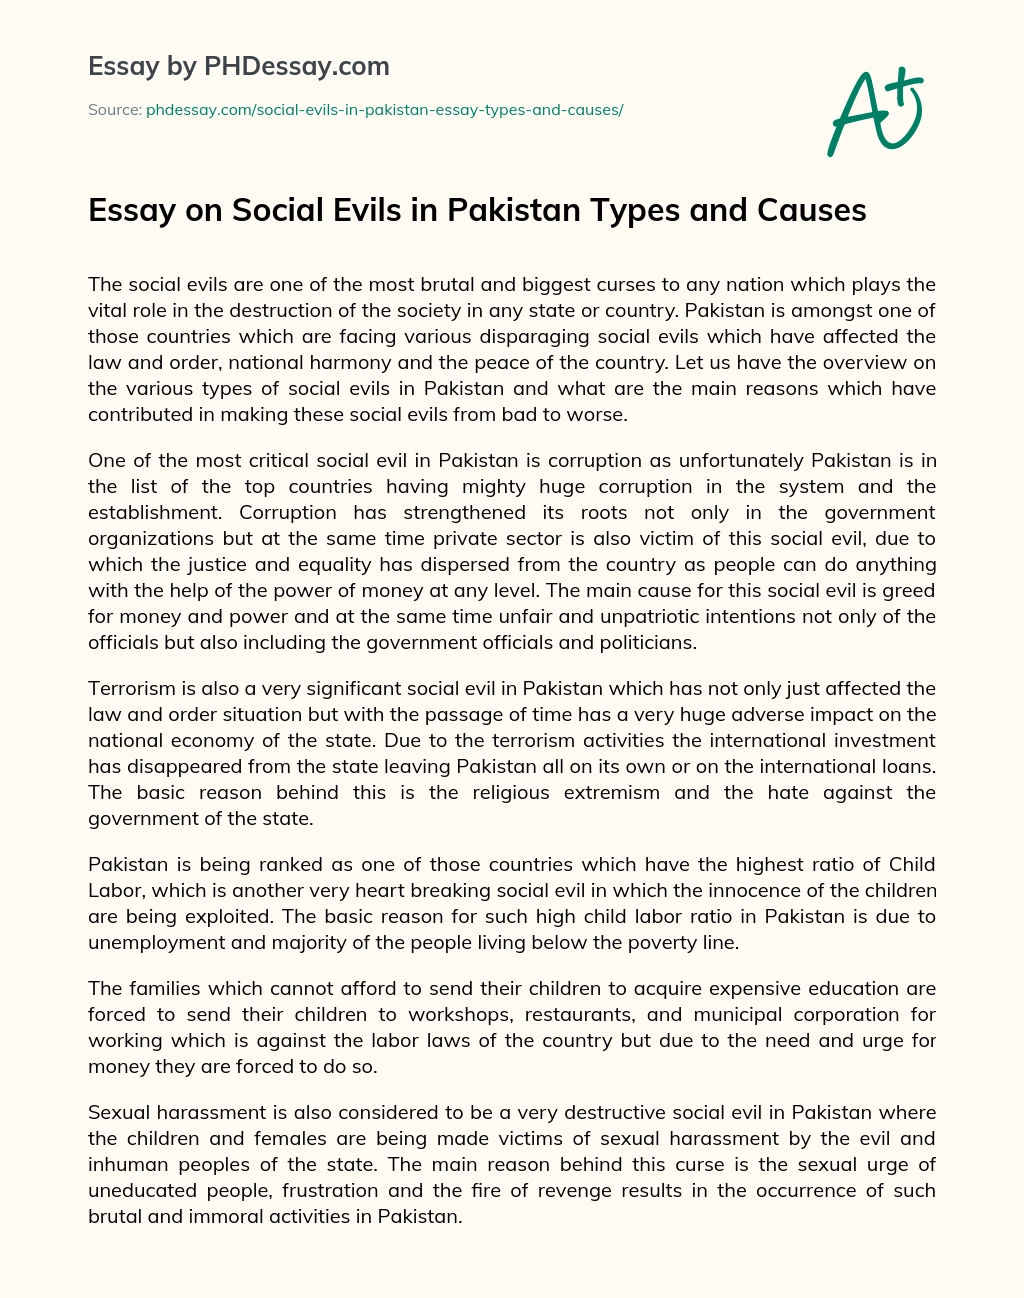 Essay on Social Evils in Pakistan Types and Causes essay